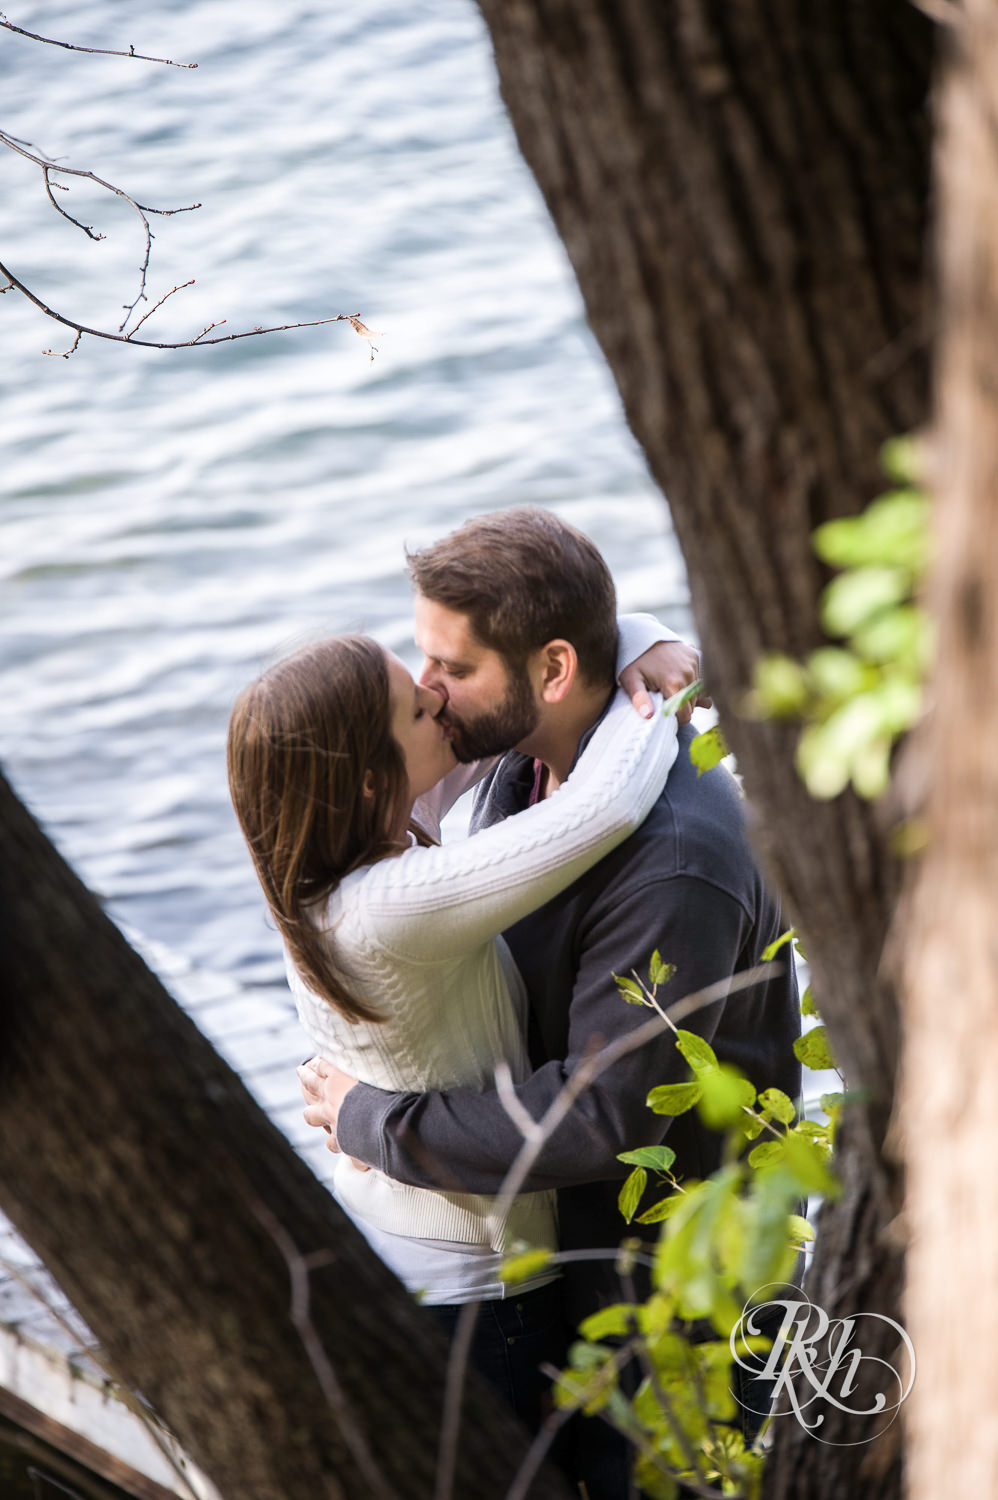 Man and woman kiss in front of lake during engagement photography session at home in Annandale, Minnesota.